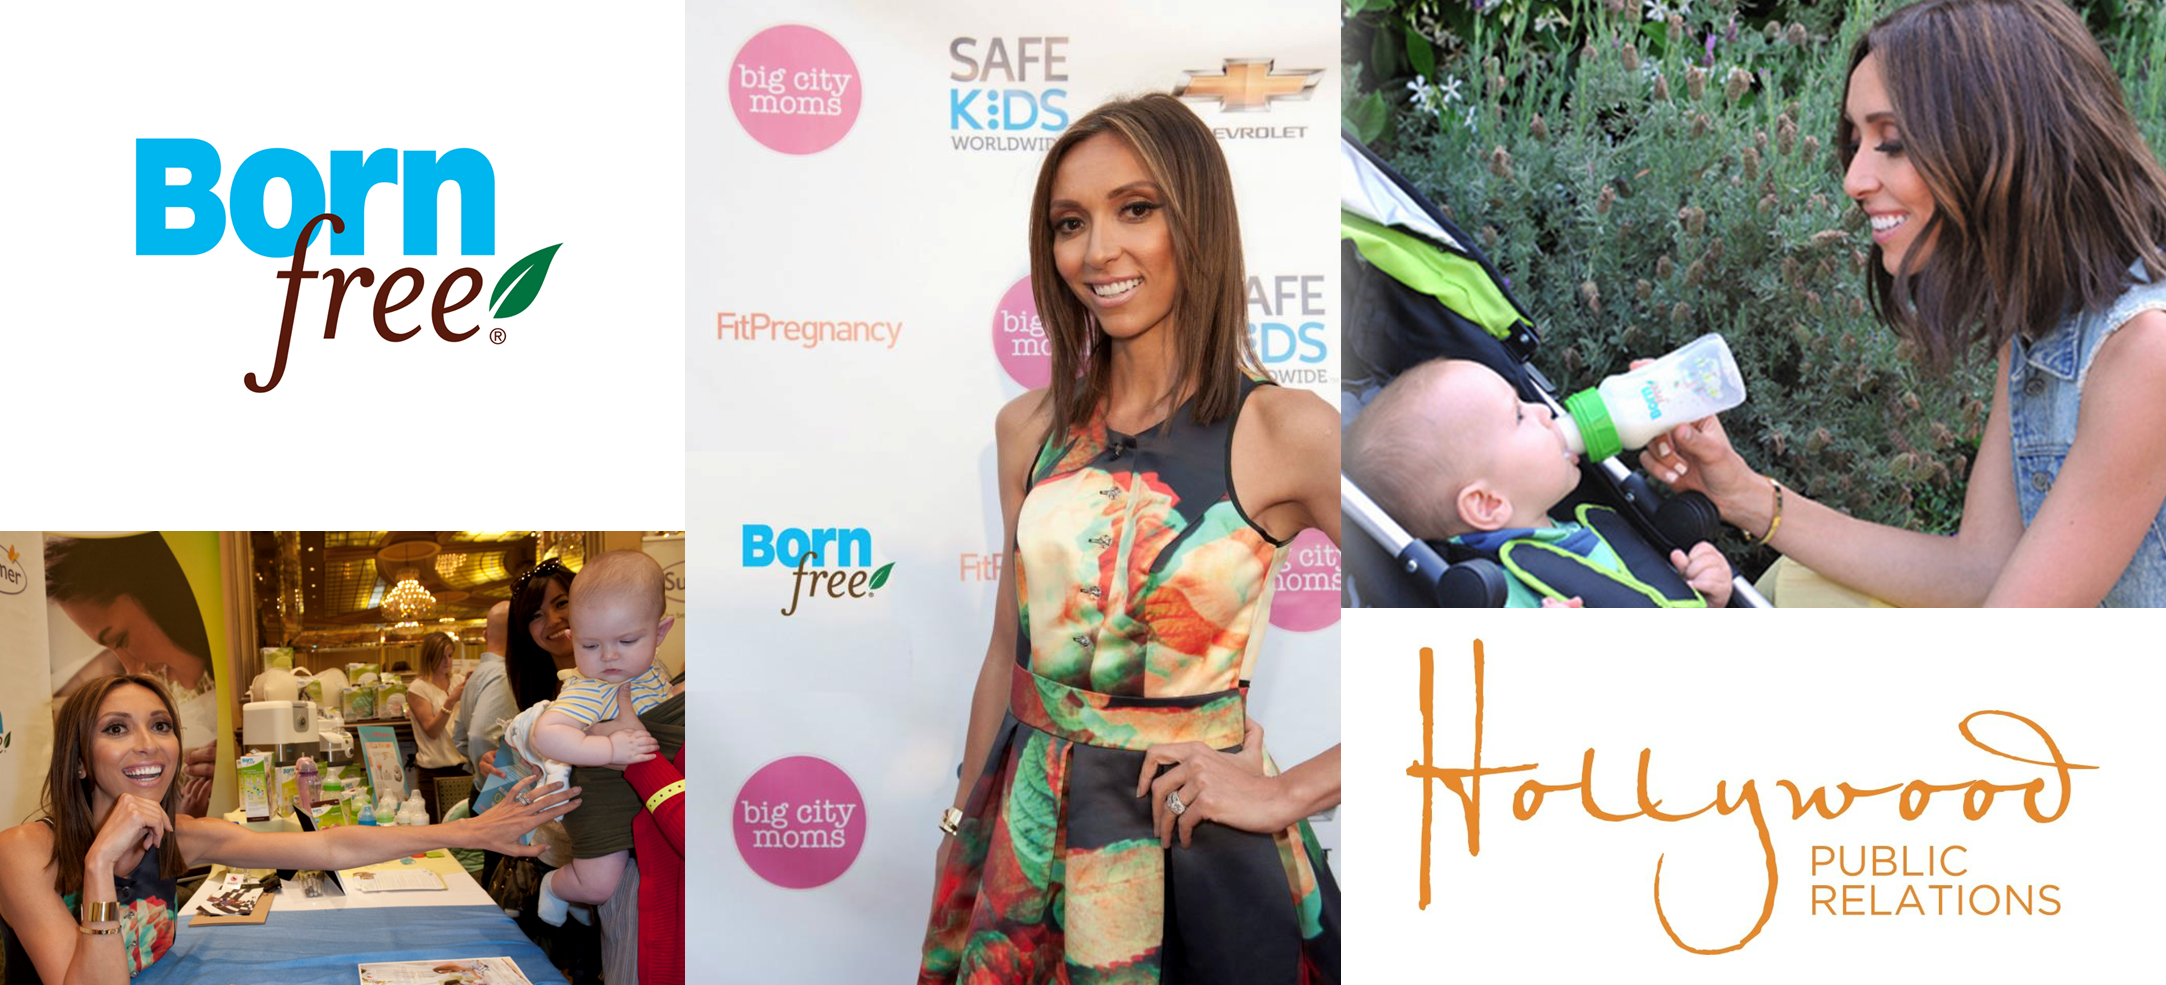 Colic Awareness Campaign with Giuliana Rancic - Logo - https://s41078.pcdn.co/wp-content/uploads/2018/11/born-free-hollywood-banner.png